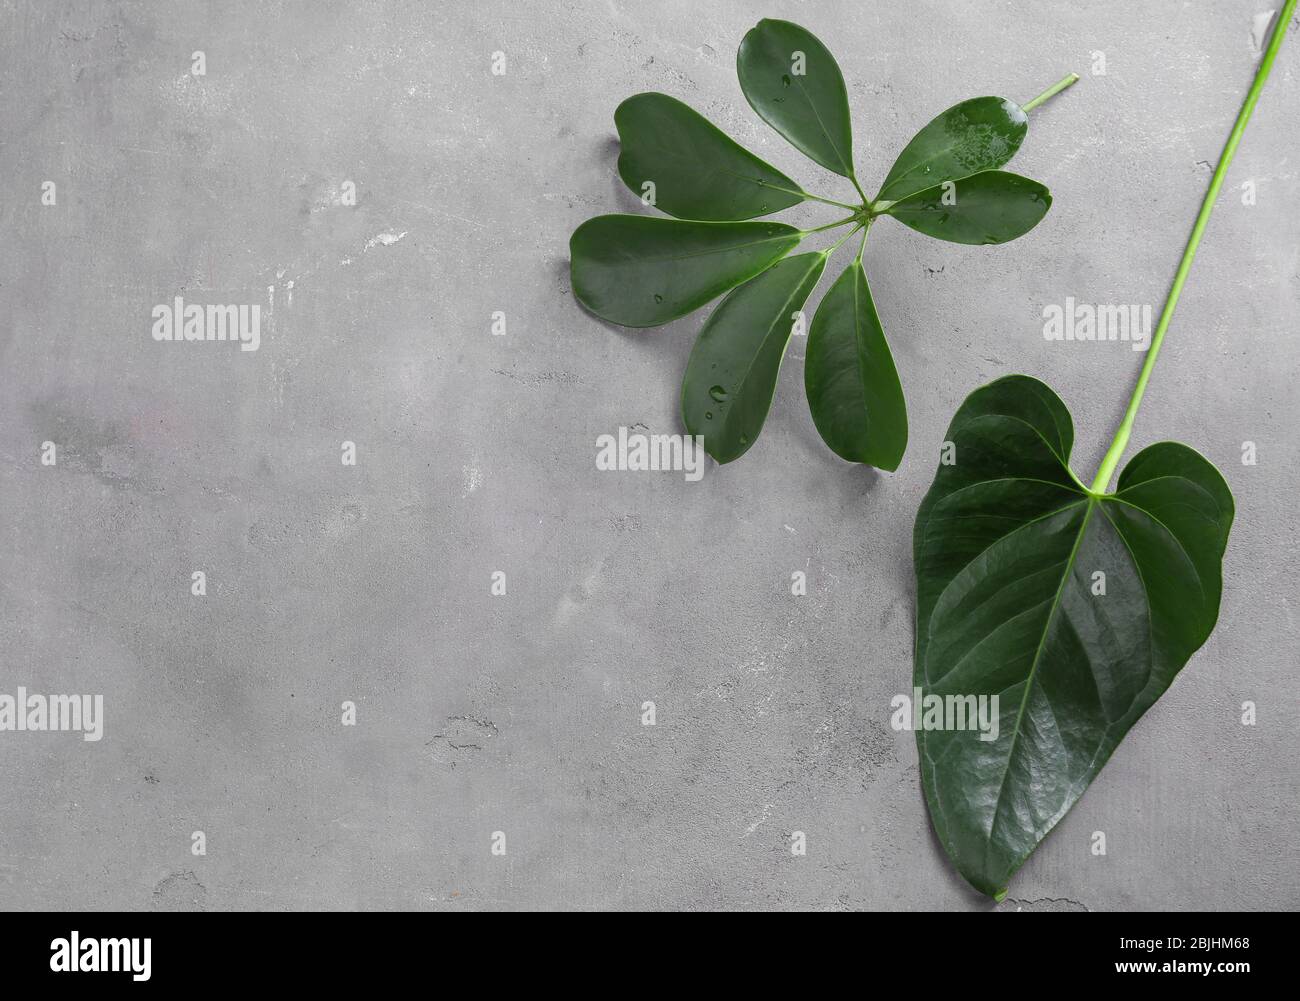 Tropical leaves on grunge background Stock Photo